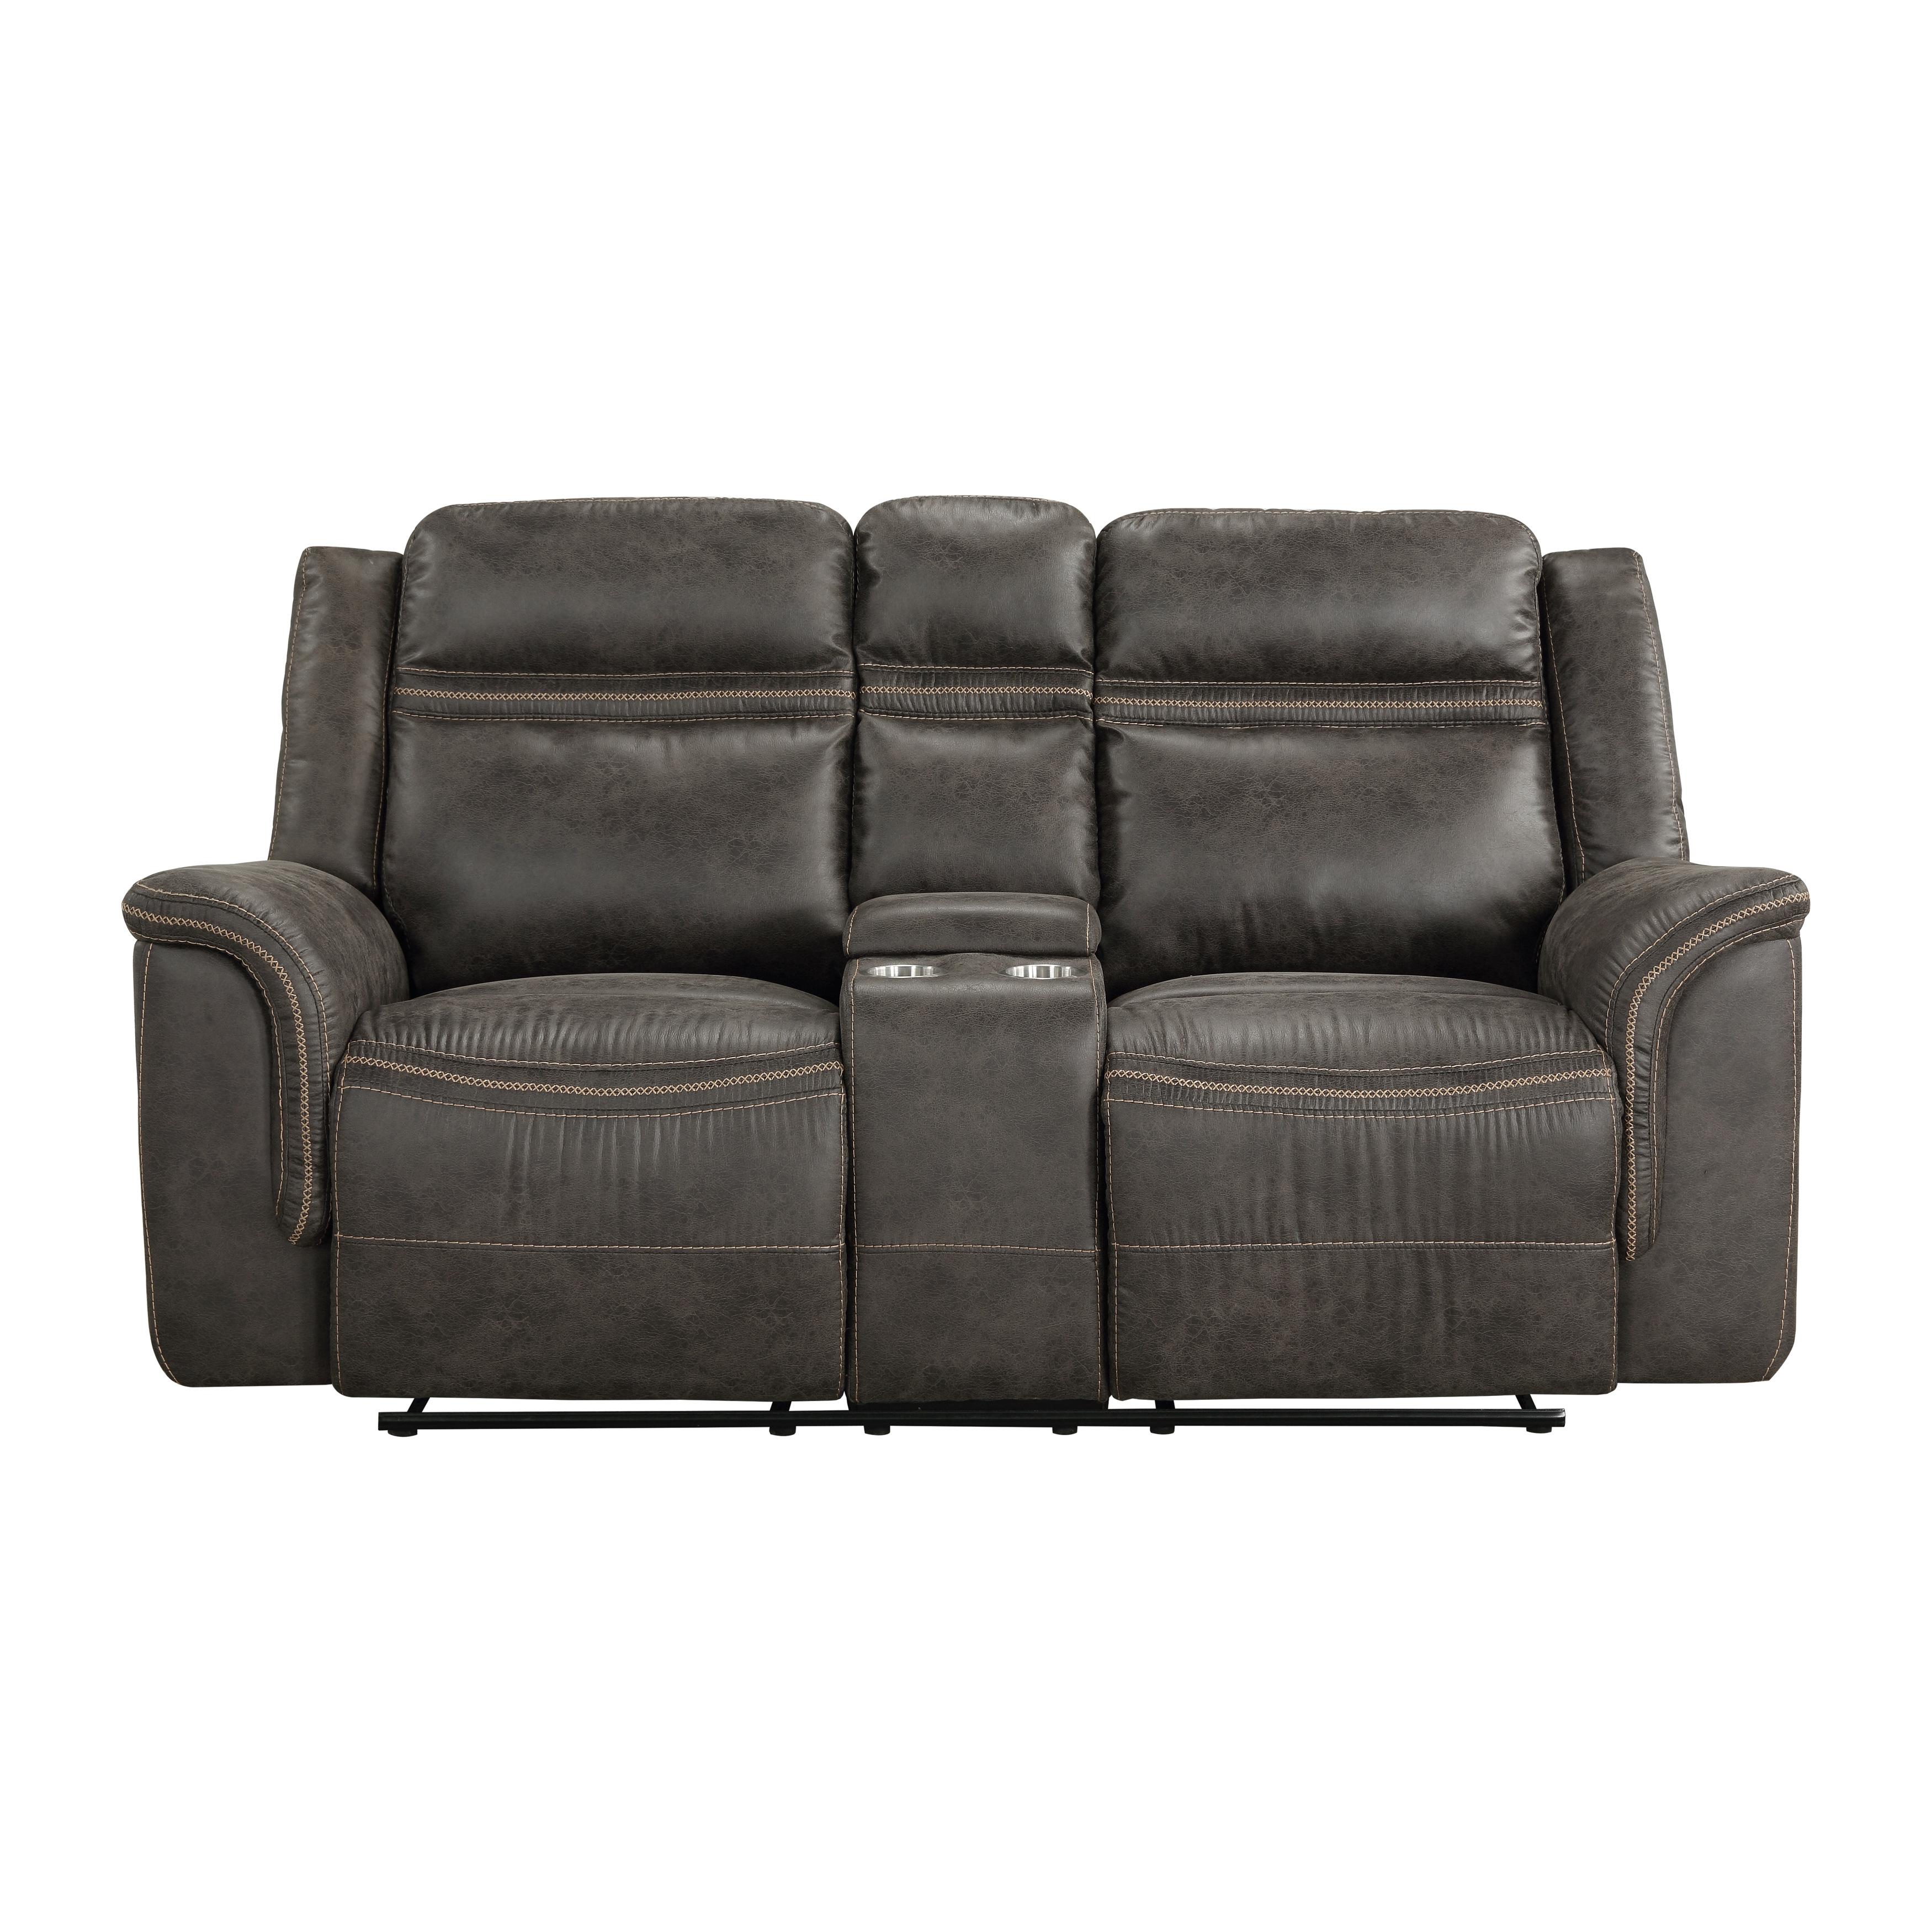 Transitional Reclining Loveseat 9426-2 Boise 9426-2 in Brown Microfiber